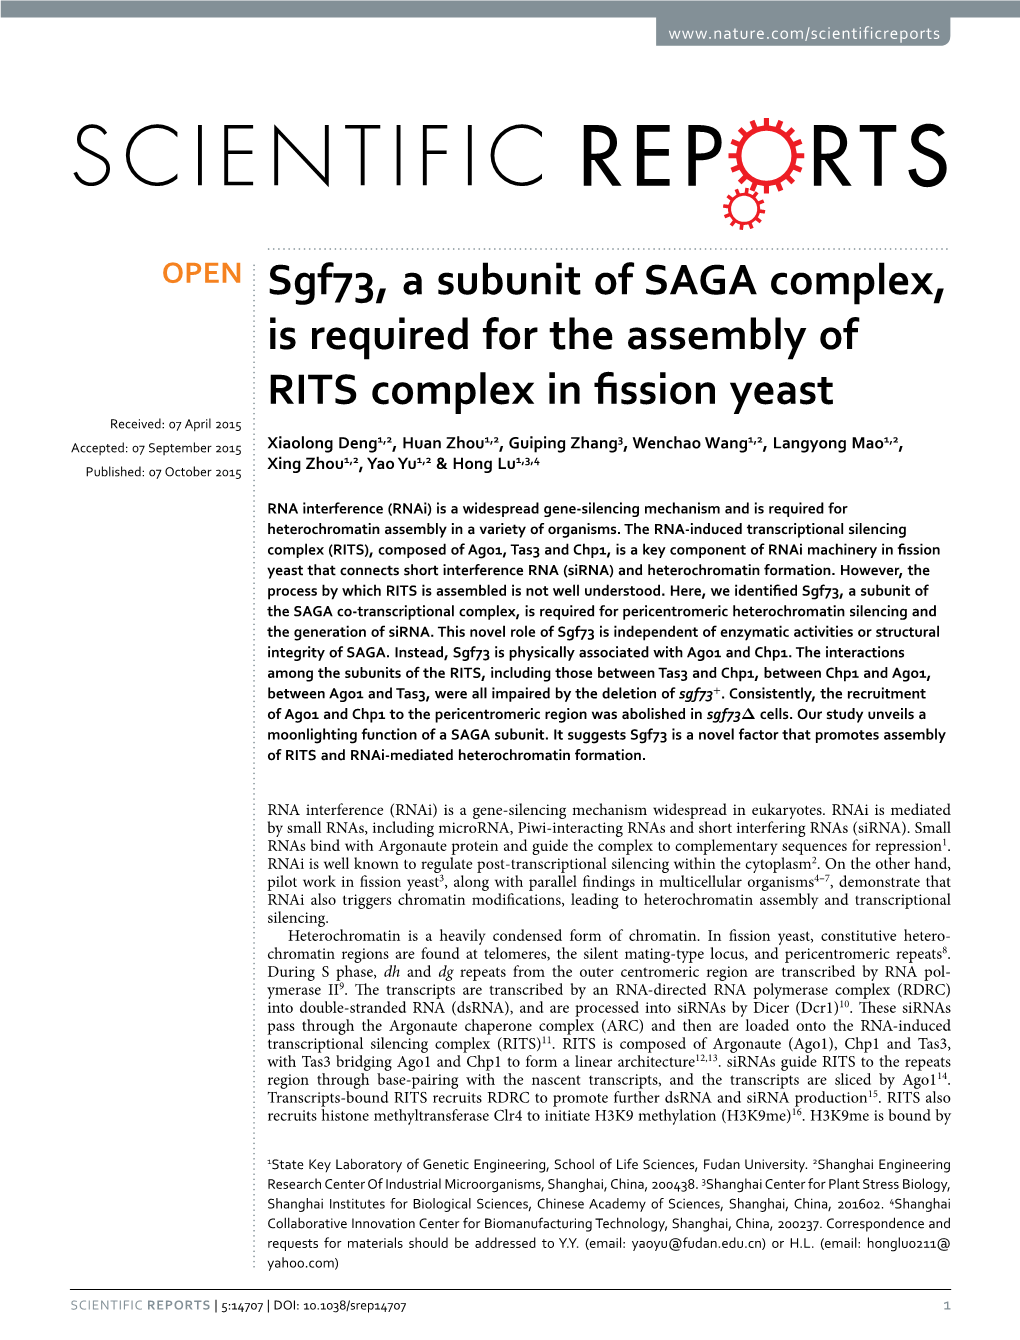 Sgf73, a Subunit of SAGA Complex, Is Required for the Assembly of RITS